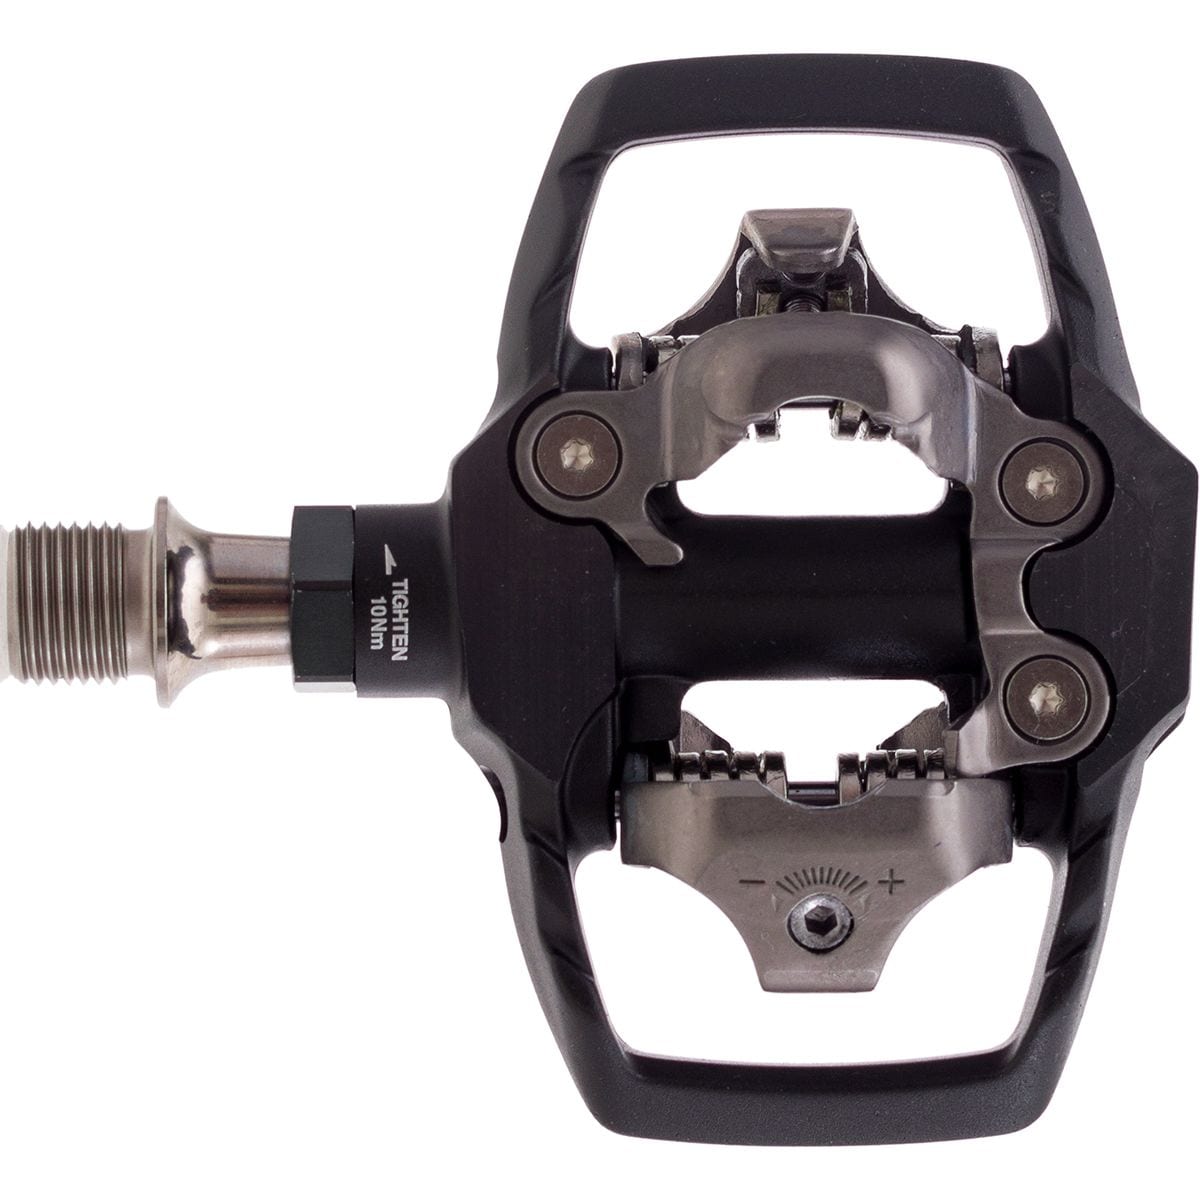 Shimano XTR PD M9020 Trail Pedals